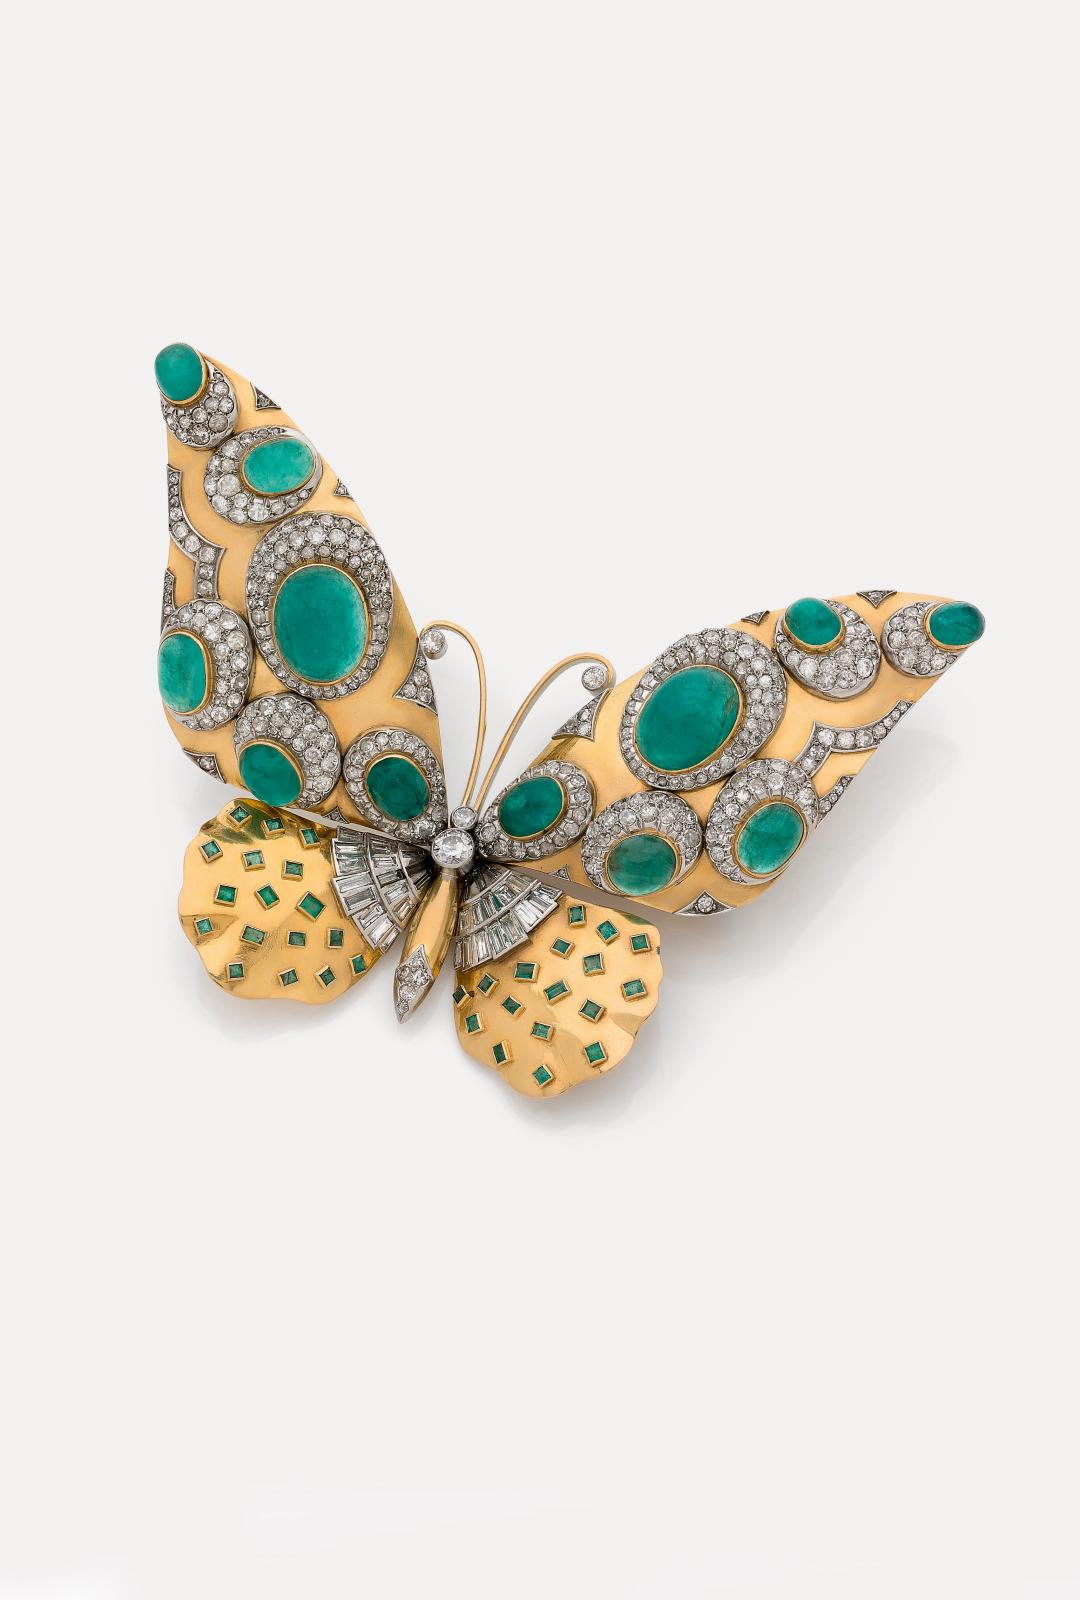 A Butterfly Brooch Flying High